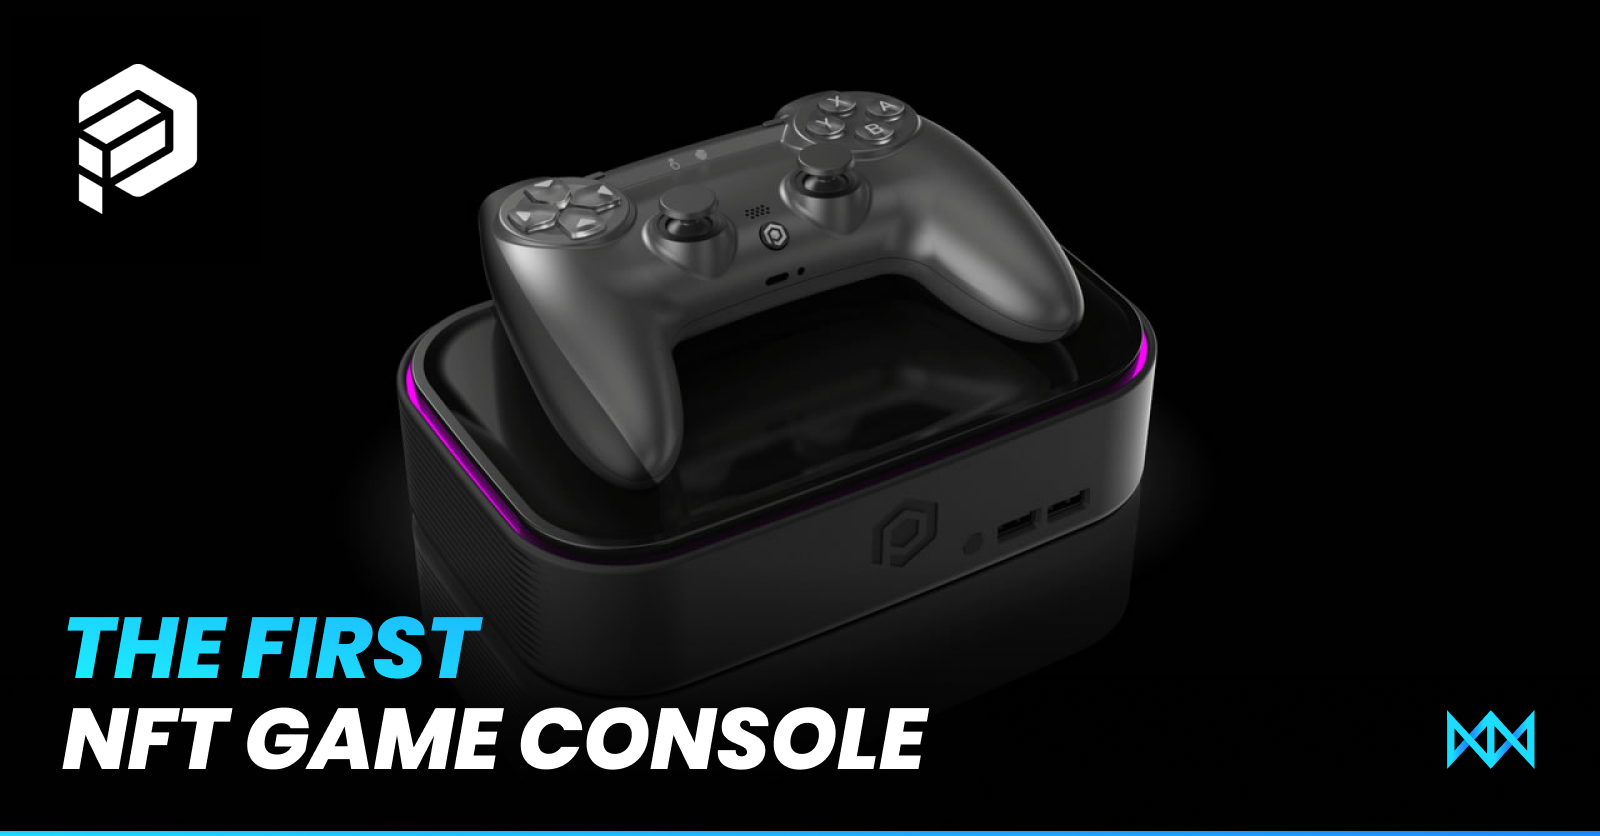 Polium One is the First NFT Gaming Console